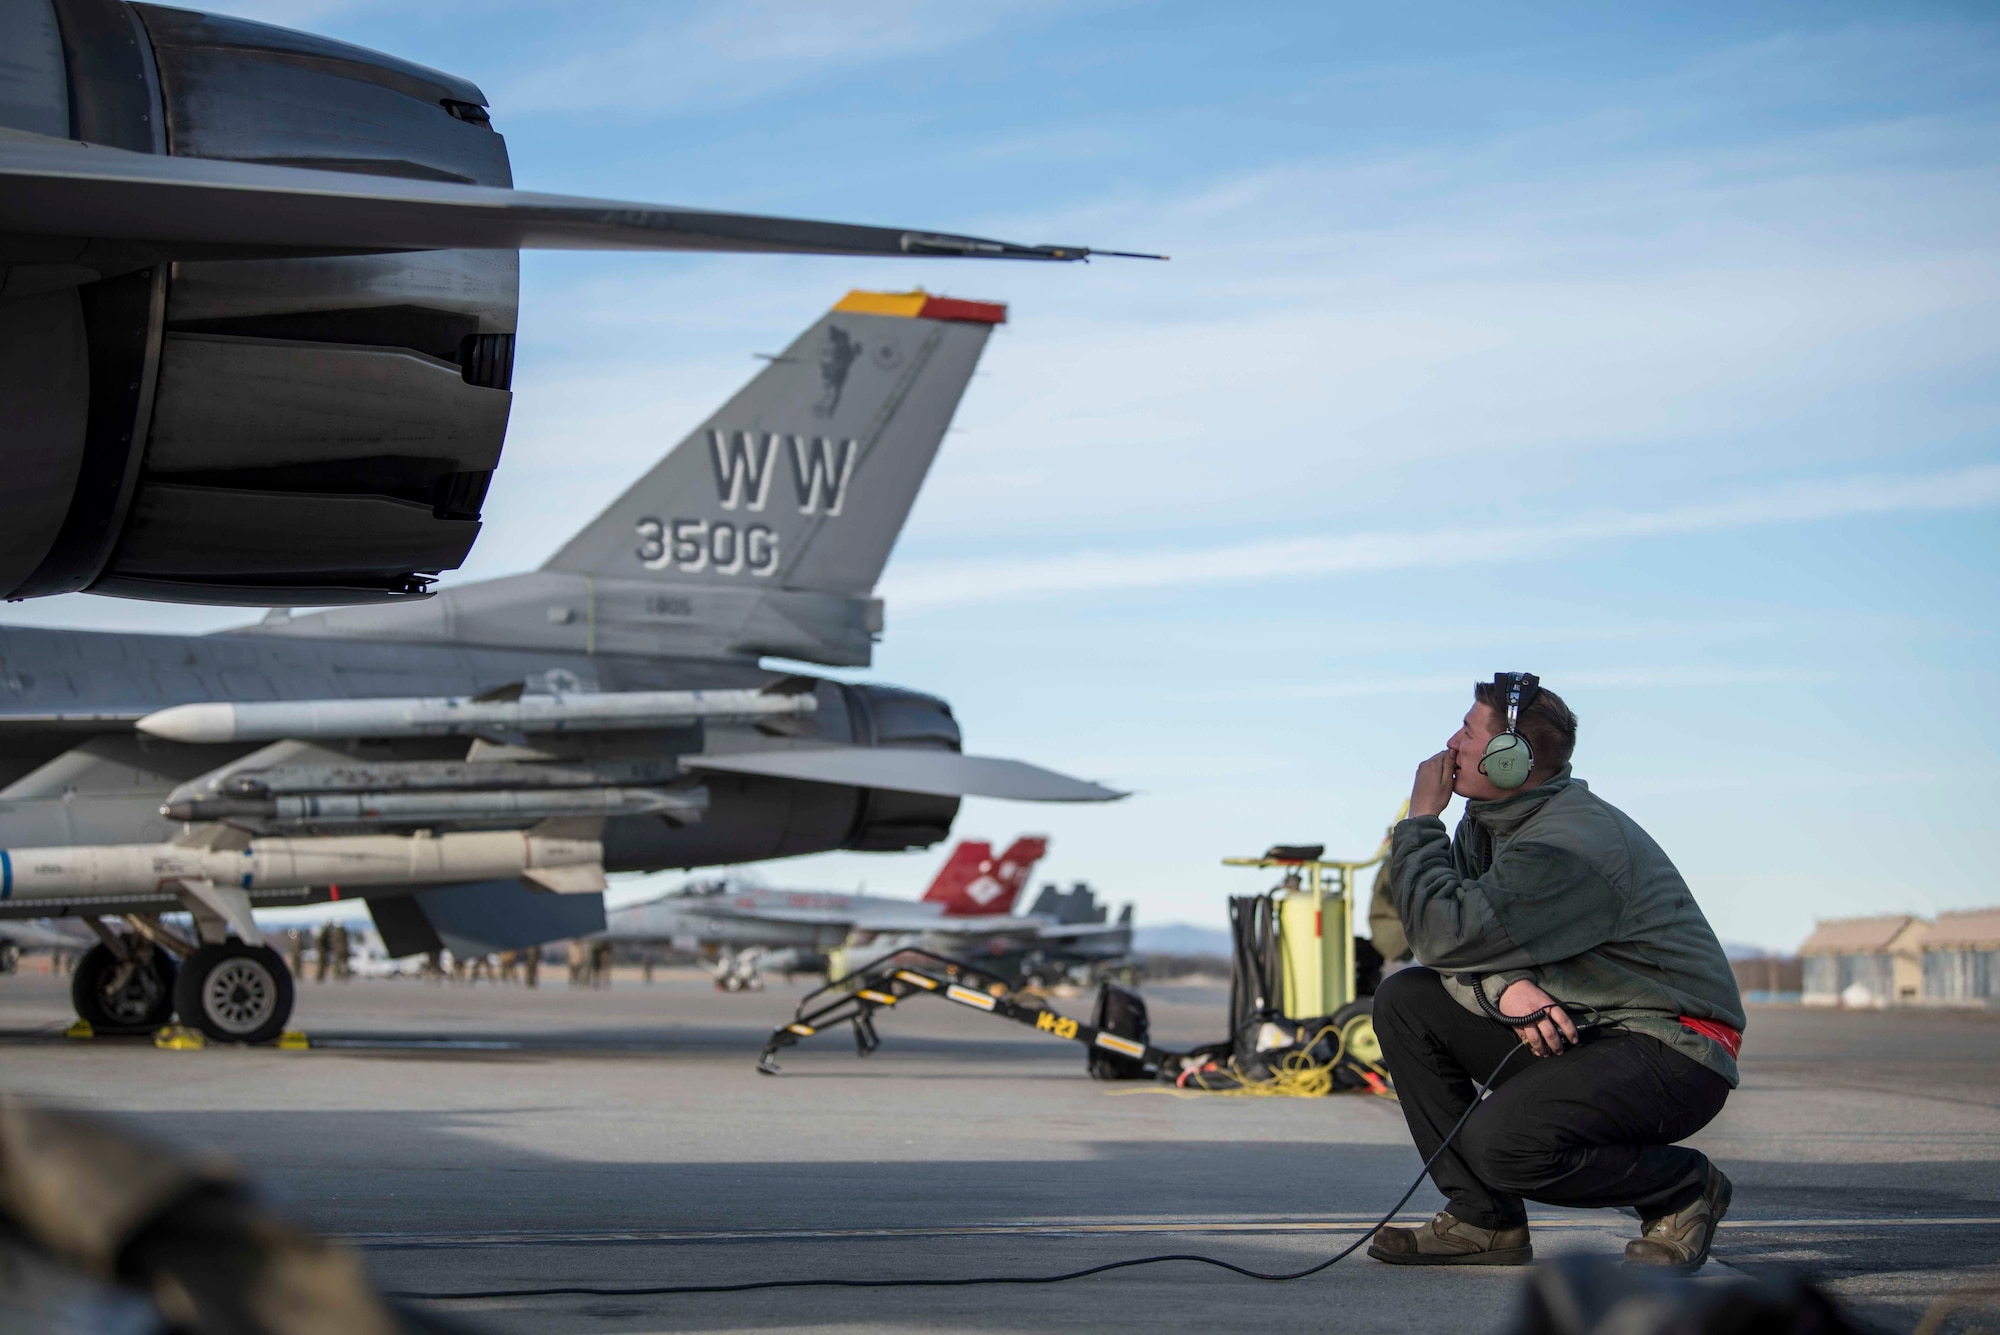 U.S. Air Force Airman 1st Class Kelsie Walls, a 13th Aircraft Maintenance Unit crew chief, communicates over a headset with a pilot prior to take-off during exercise Red Flag-Alaska 19-1, at Eielson Air Force Base, Alaska, Oct. 9, 2018. Maintainers repair jets alongside joint and multilateral partners from around the world affording them opportunities to exchange tactics, operations techniques and procedures which improves international interoperability. (U.S. Air Force photo by Airman 1st Class Collette Brooks)